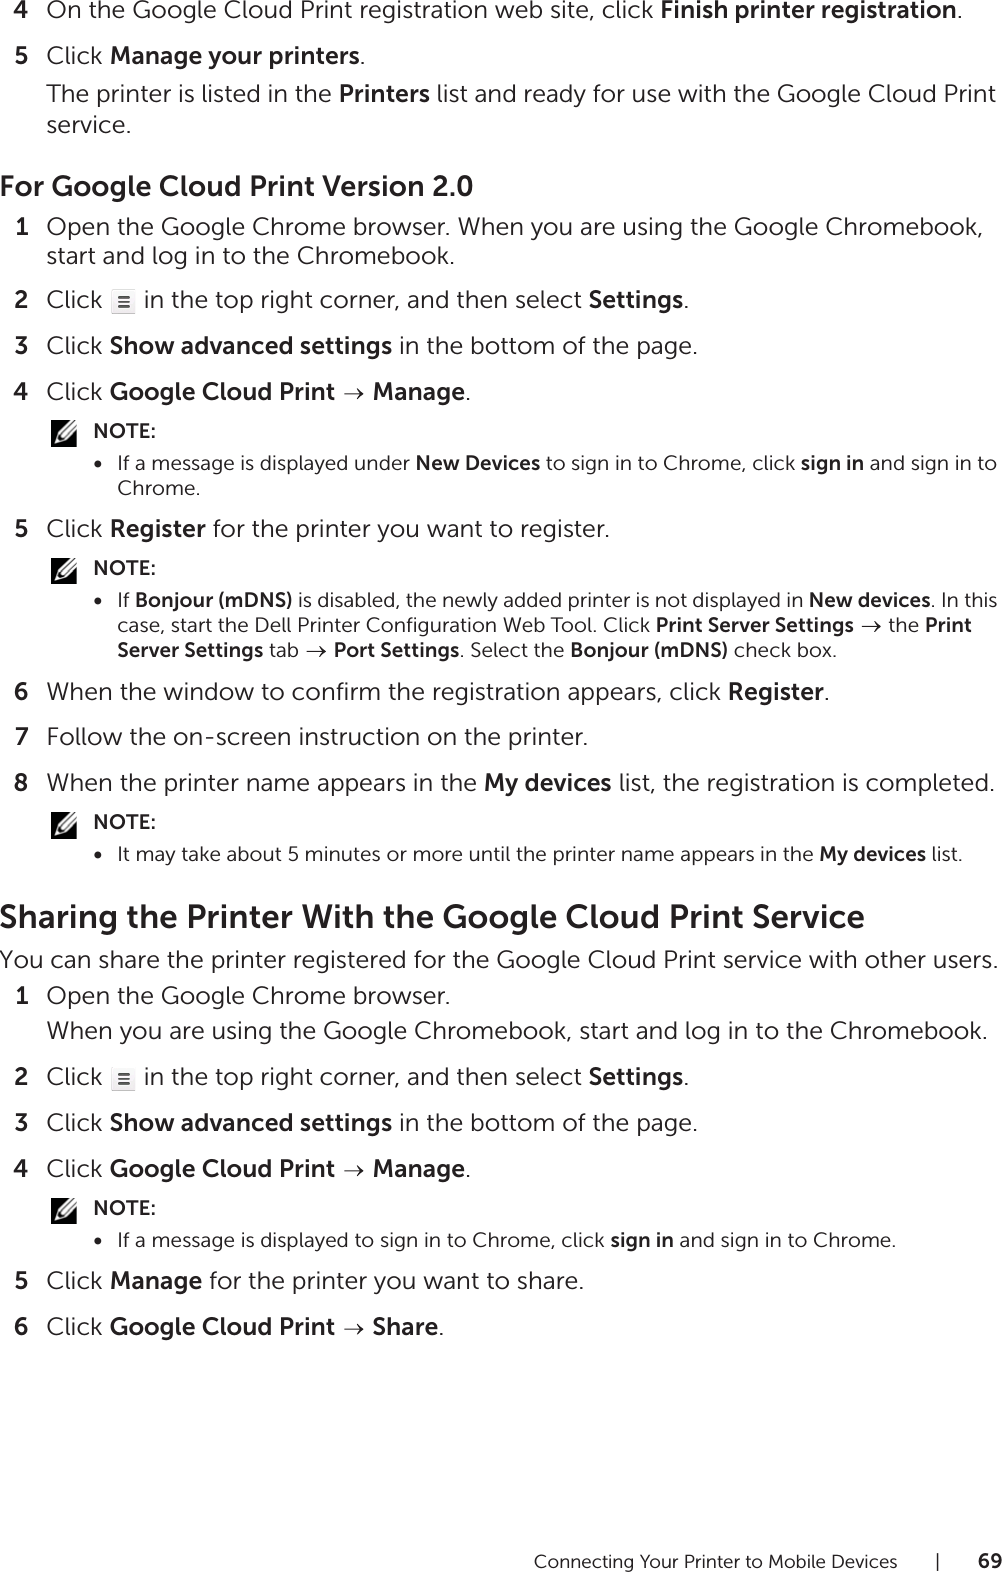 Connecting Your Printer to Mobile Devices |694On the Google Cloud Print registration web site, click Finish printer registration.5Click Manage your printers.The printer is listed in the Printers list and ready for use with the Google Cloud Print service.For Google Cloud Print Version 2.01Open the Google Chrome browser. When you are using the Google Chromebook, start and log in to the Chromebook.2Click   in the top right corner, and then select Settings.3Click Show advanced settings in the bottom of the page.4Click Google Cloud Print  Manage.NOTE:•If a message is displayed under New Devices to sign in to Chrome, click sign in and sign in to Chrome.5Click Register for the printer you want to register.NOTE:•If Bonjour (mDNS) is disabled, the newly added printer is not displayed in New devices. In this case, start the Dell Printer Configuration Web Tool. Click Print Server Settings  the Print Server Settings tab   Port Settings. Select the Bonjour (mDNS) check box.6When the window to confirm the registration appears, click Register.7Follow the on-screen instruction on the printer.8When the printer name appears in the My devices list, the registration is completed.NOTE:•It may take about 5 minutes or more until the printer name appears in the My devices list.Sharing the Printer With the Google Cloud Print ServiceYou can share the printer registered for the Google Cloud Print service with other users.1Open the Google Chrome browser.When you are using the Google Chromebook, start and log in to the Chromebook.2Click   in the top right corner, and then select Settings.3Click Show advanced settings in the bottom of the page.4Click Google Cloud Print  Manage.NOTE:•If a message is displayed to sign in to Chrome, click sign in and sign in to Chrome.5Click Manage for the printer you want to share.6Click Google Cloud Print  Share.